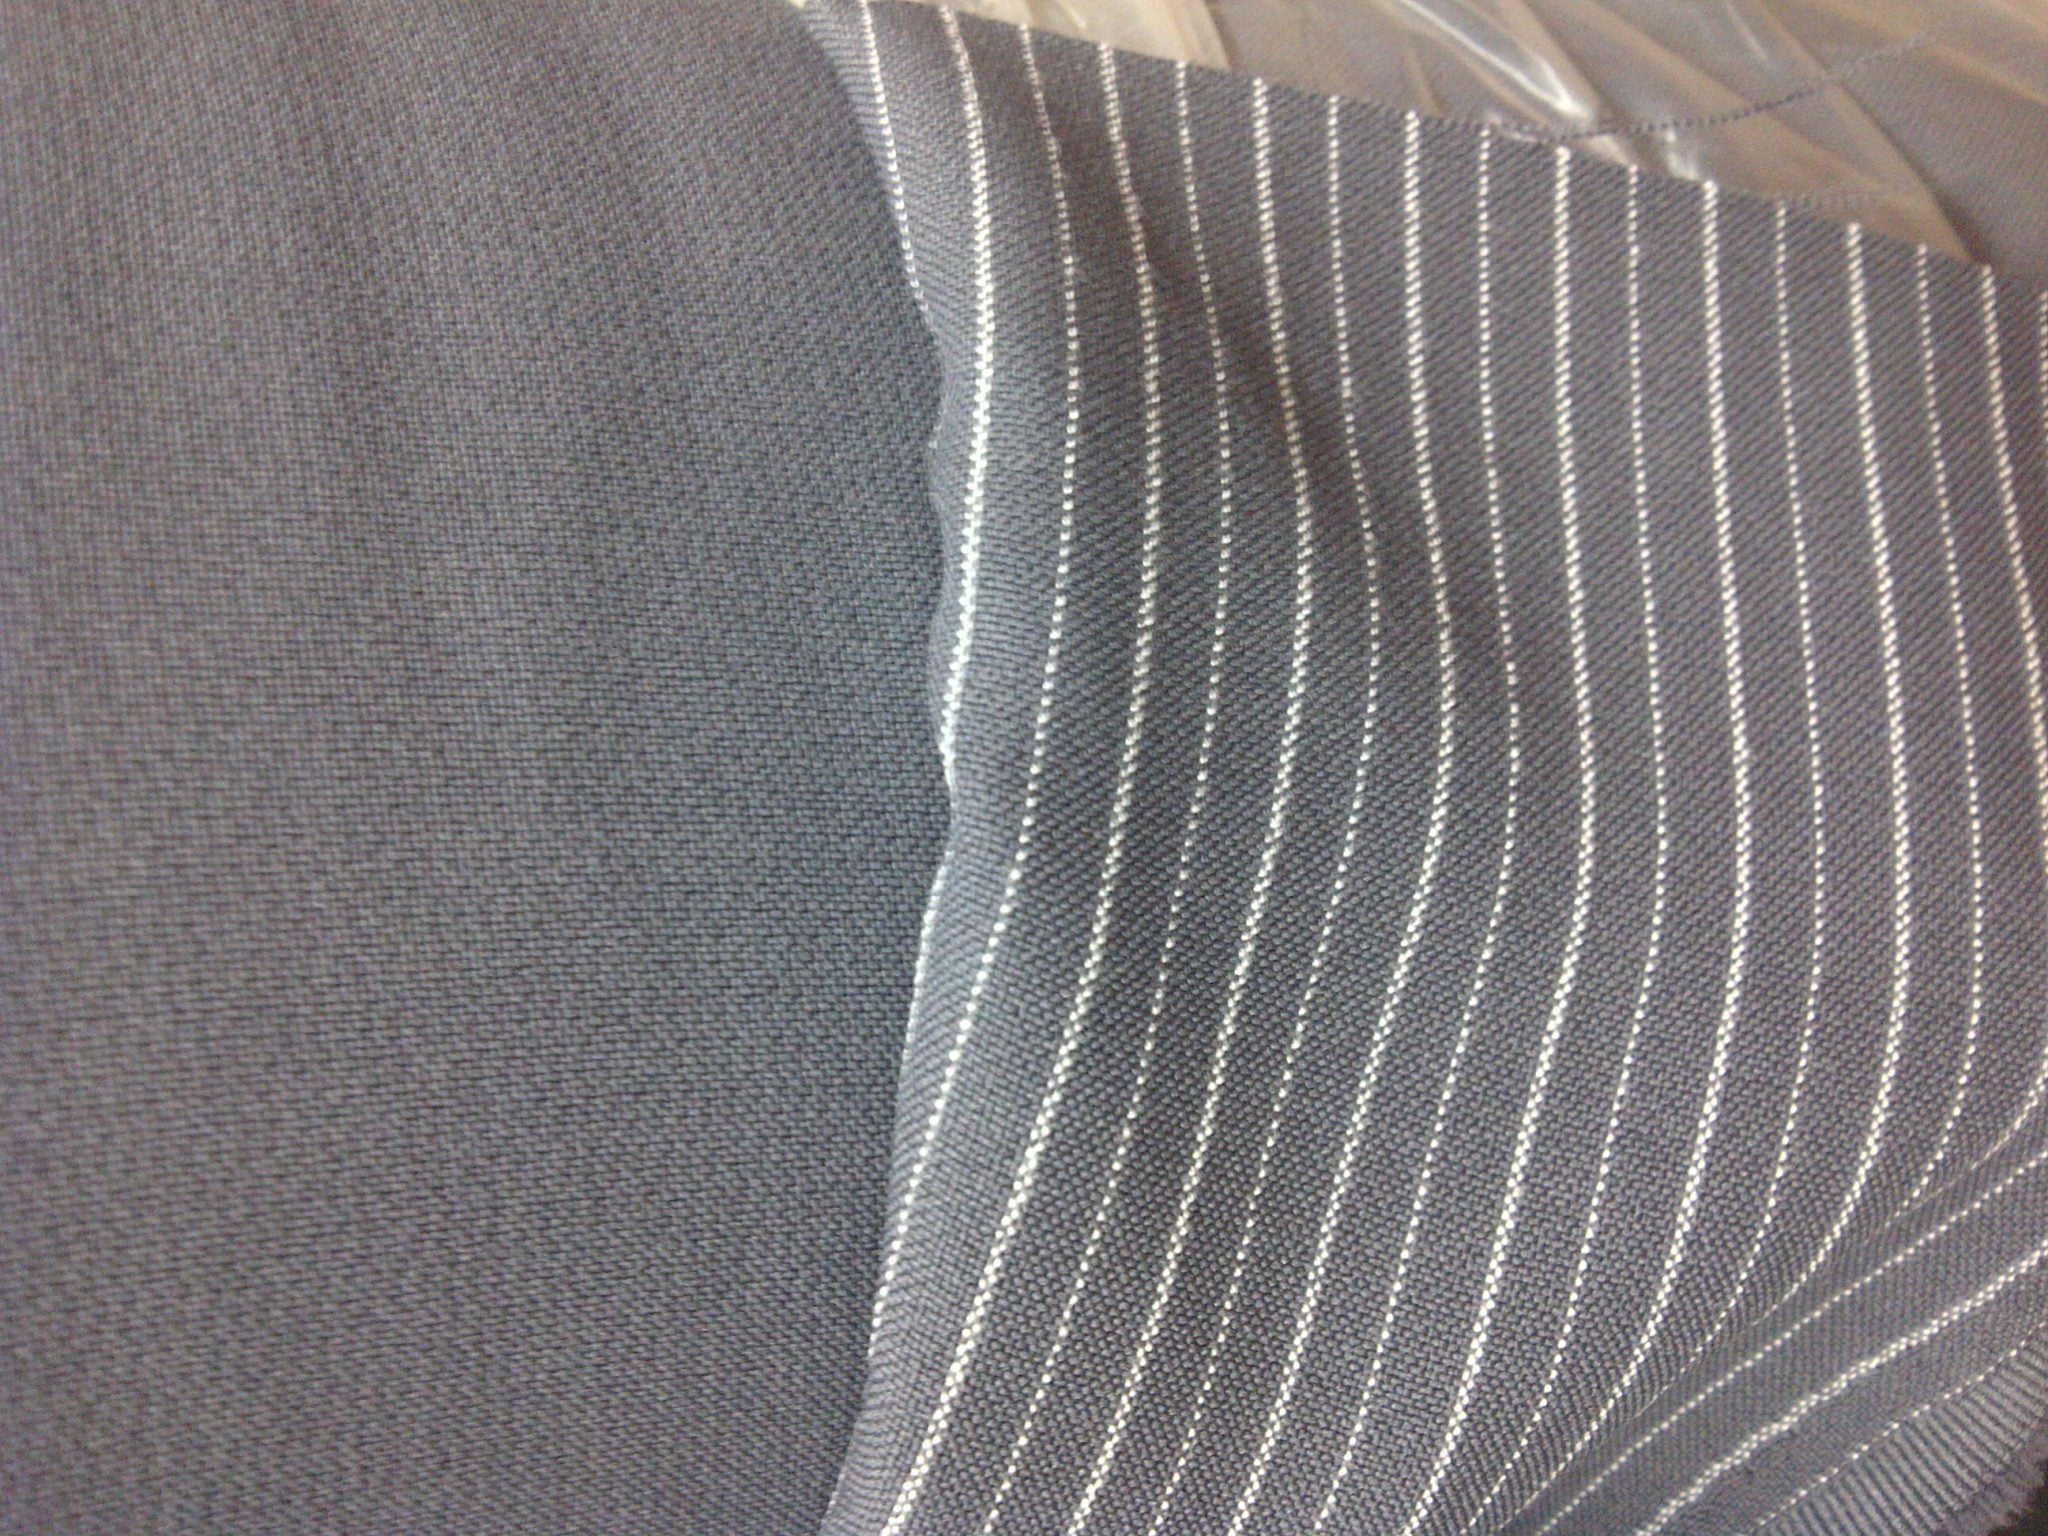 Striped Suiting - Abies Dress Fabric